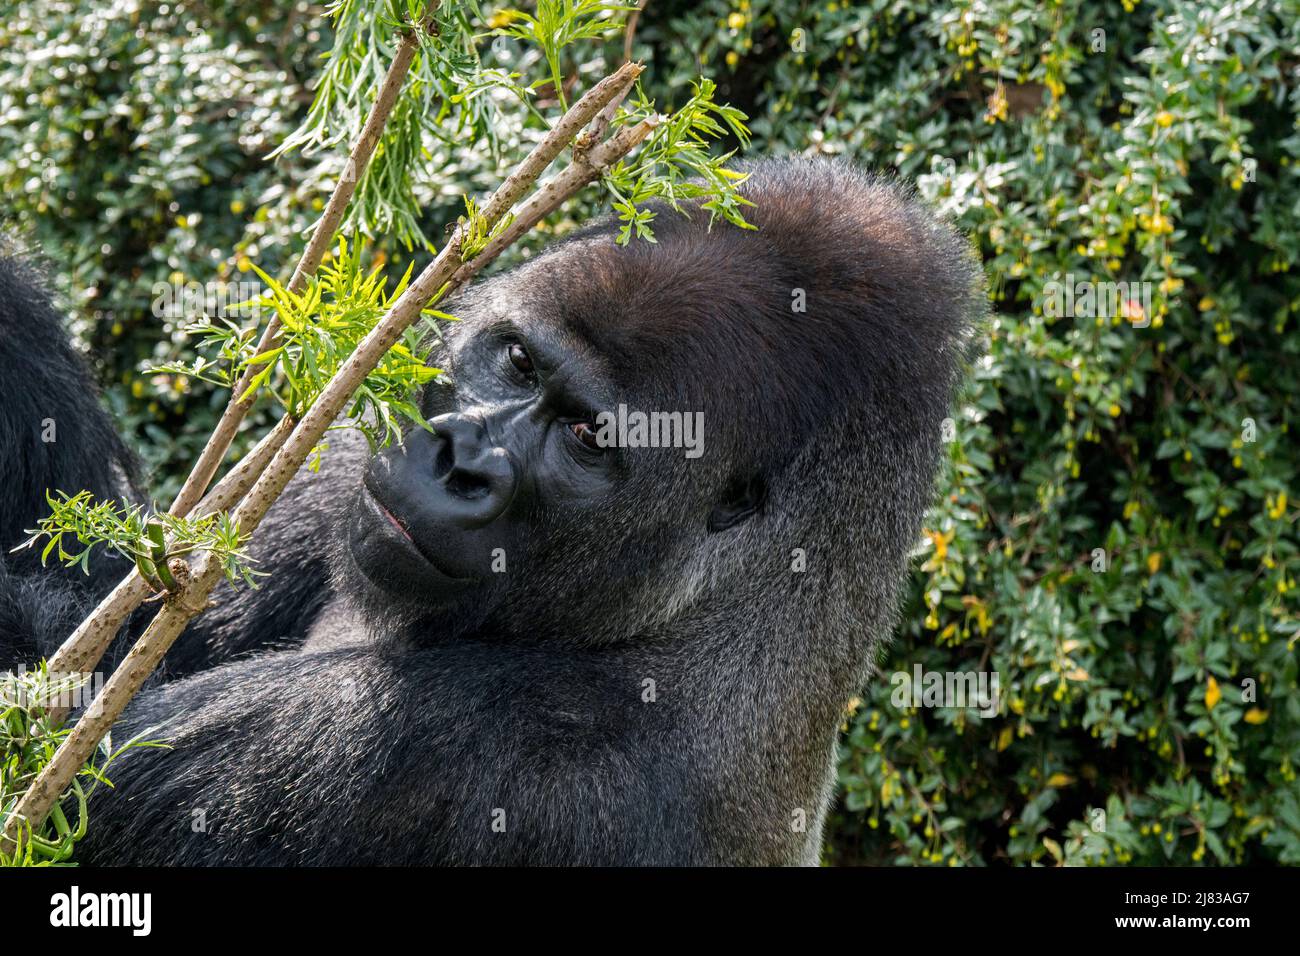 Western lowland gorilla (Gorilla gorilla gorilla) male silverback in forest Stock Photo